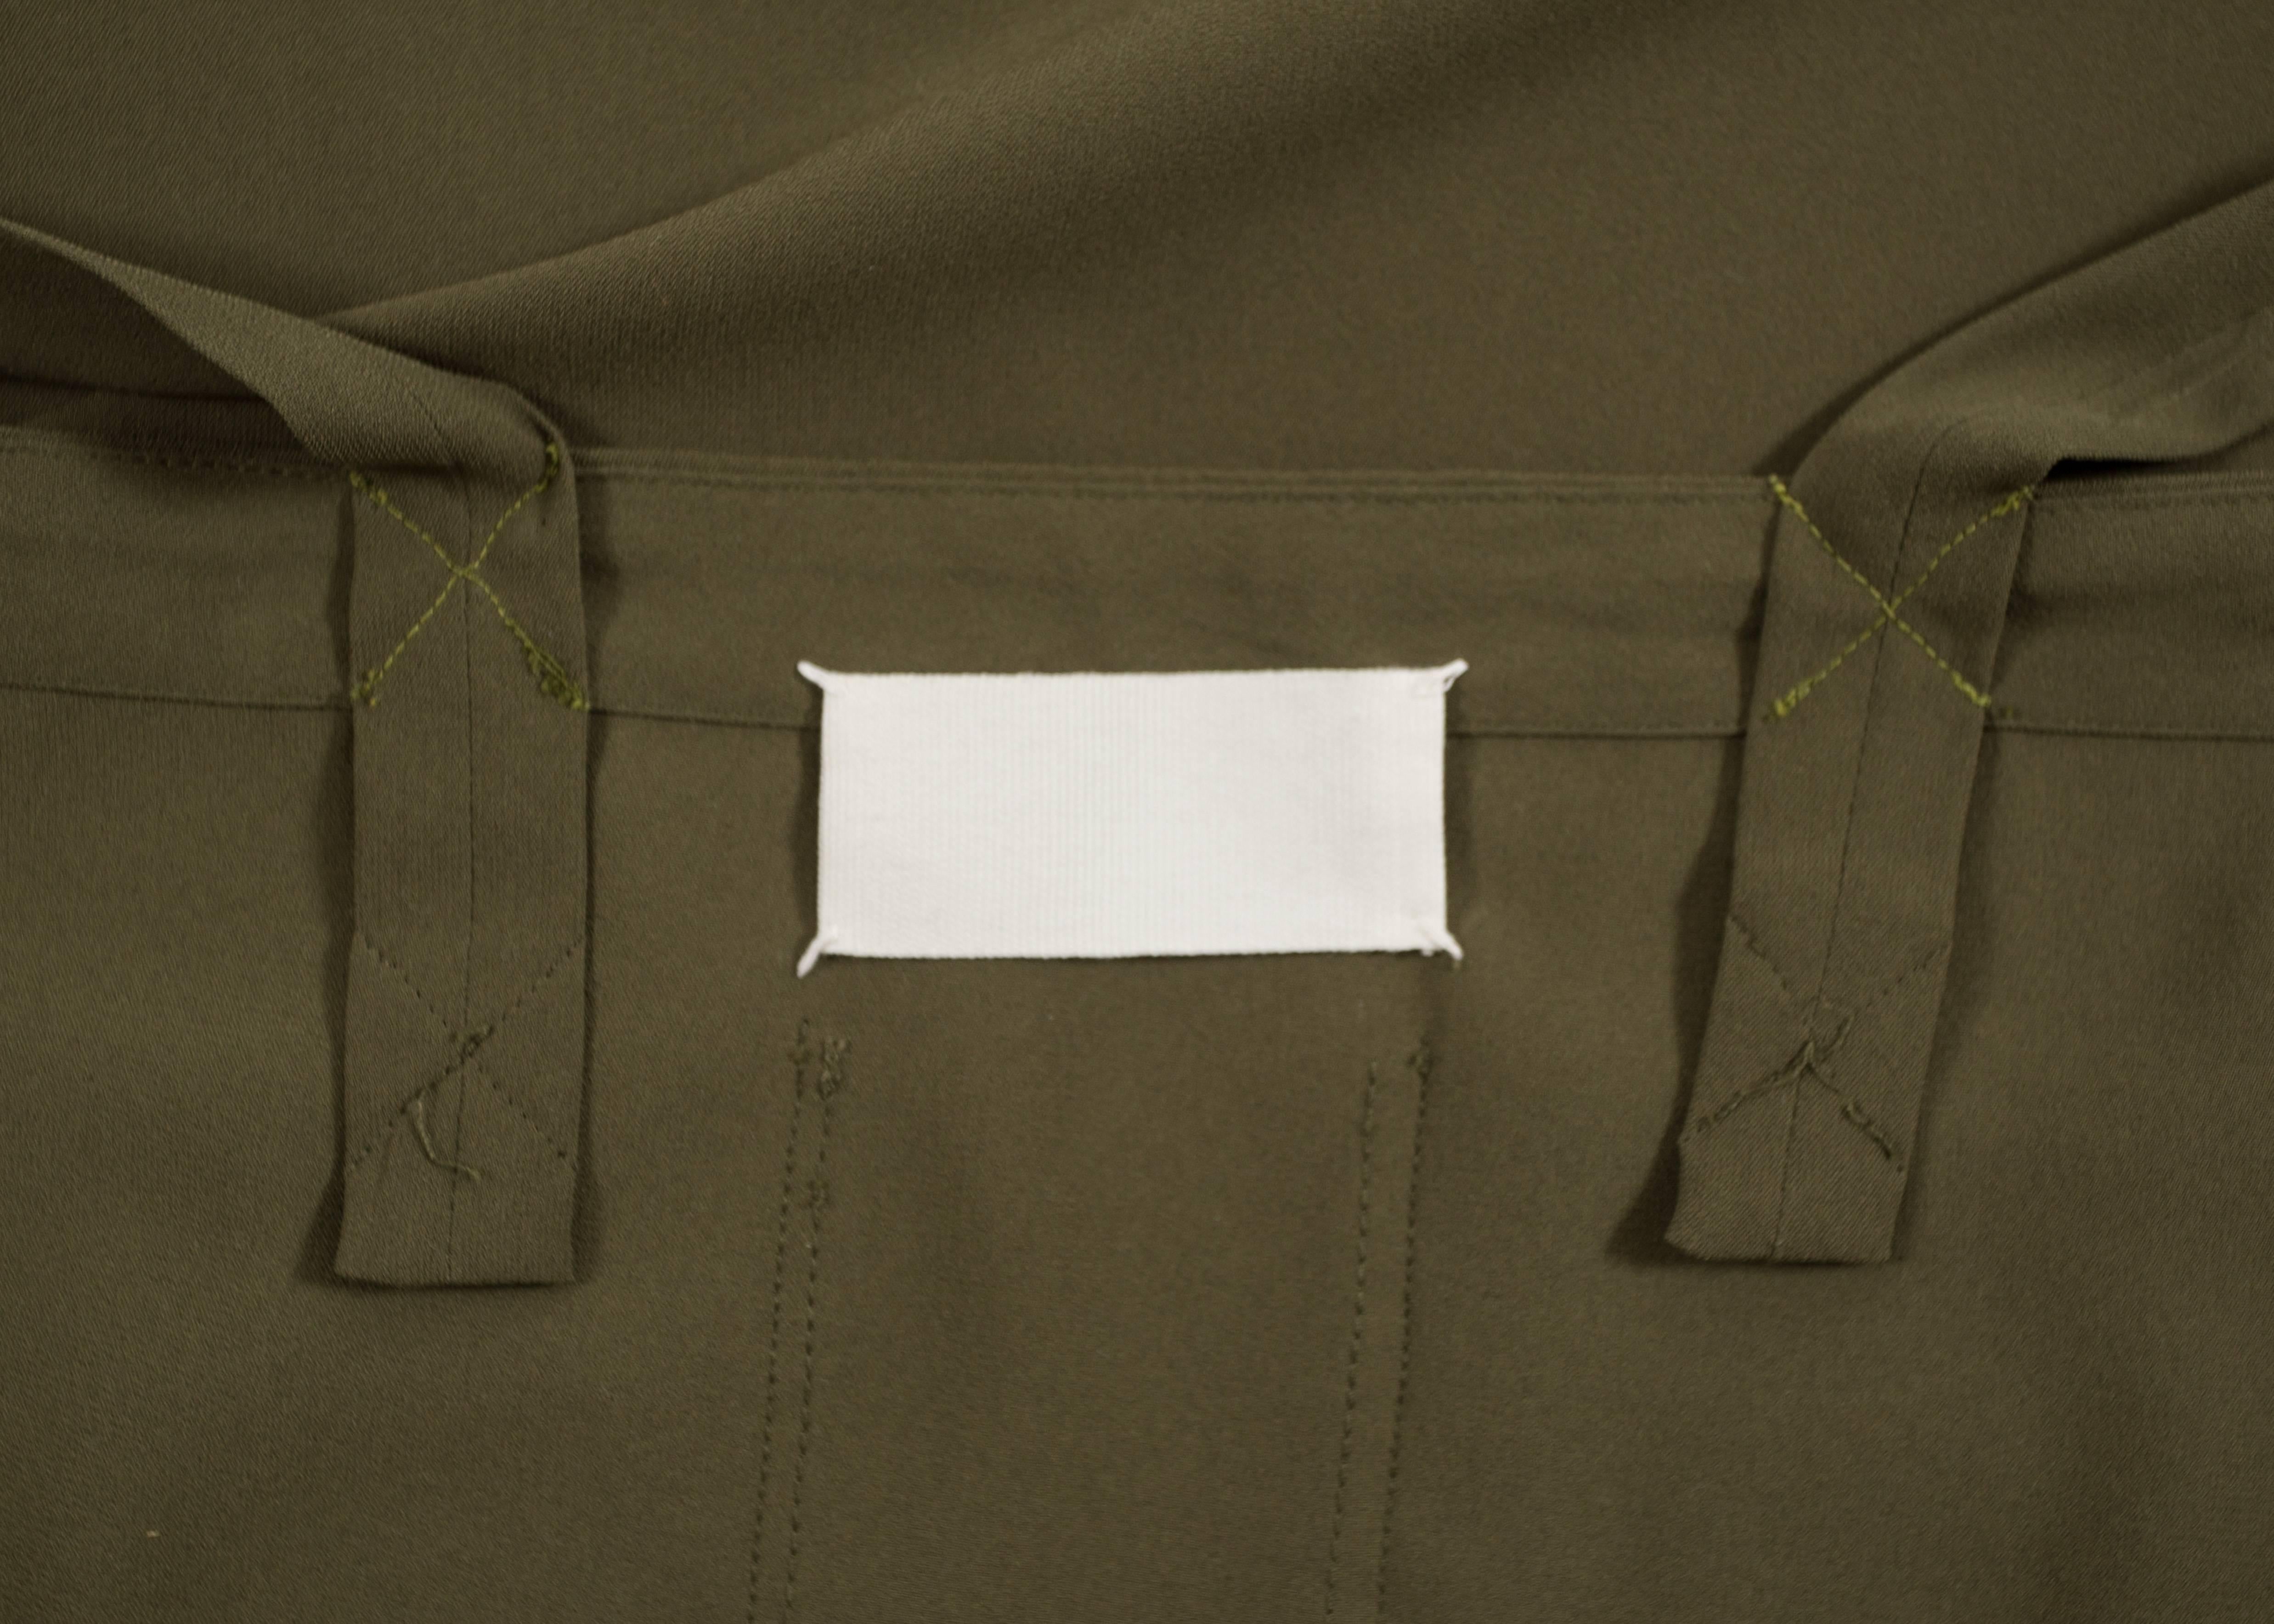 Maison Martin Margiela Autumn-Winter 1999 khaki green long apron In Excellent Condition For Sale In London, GB